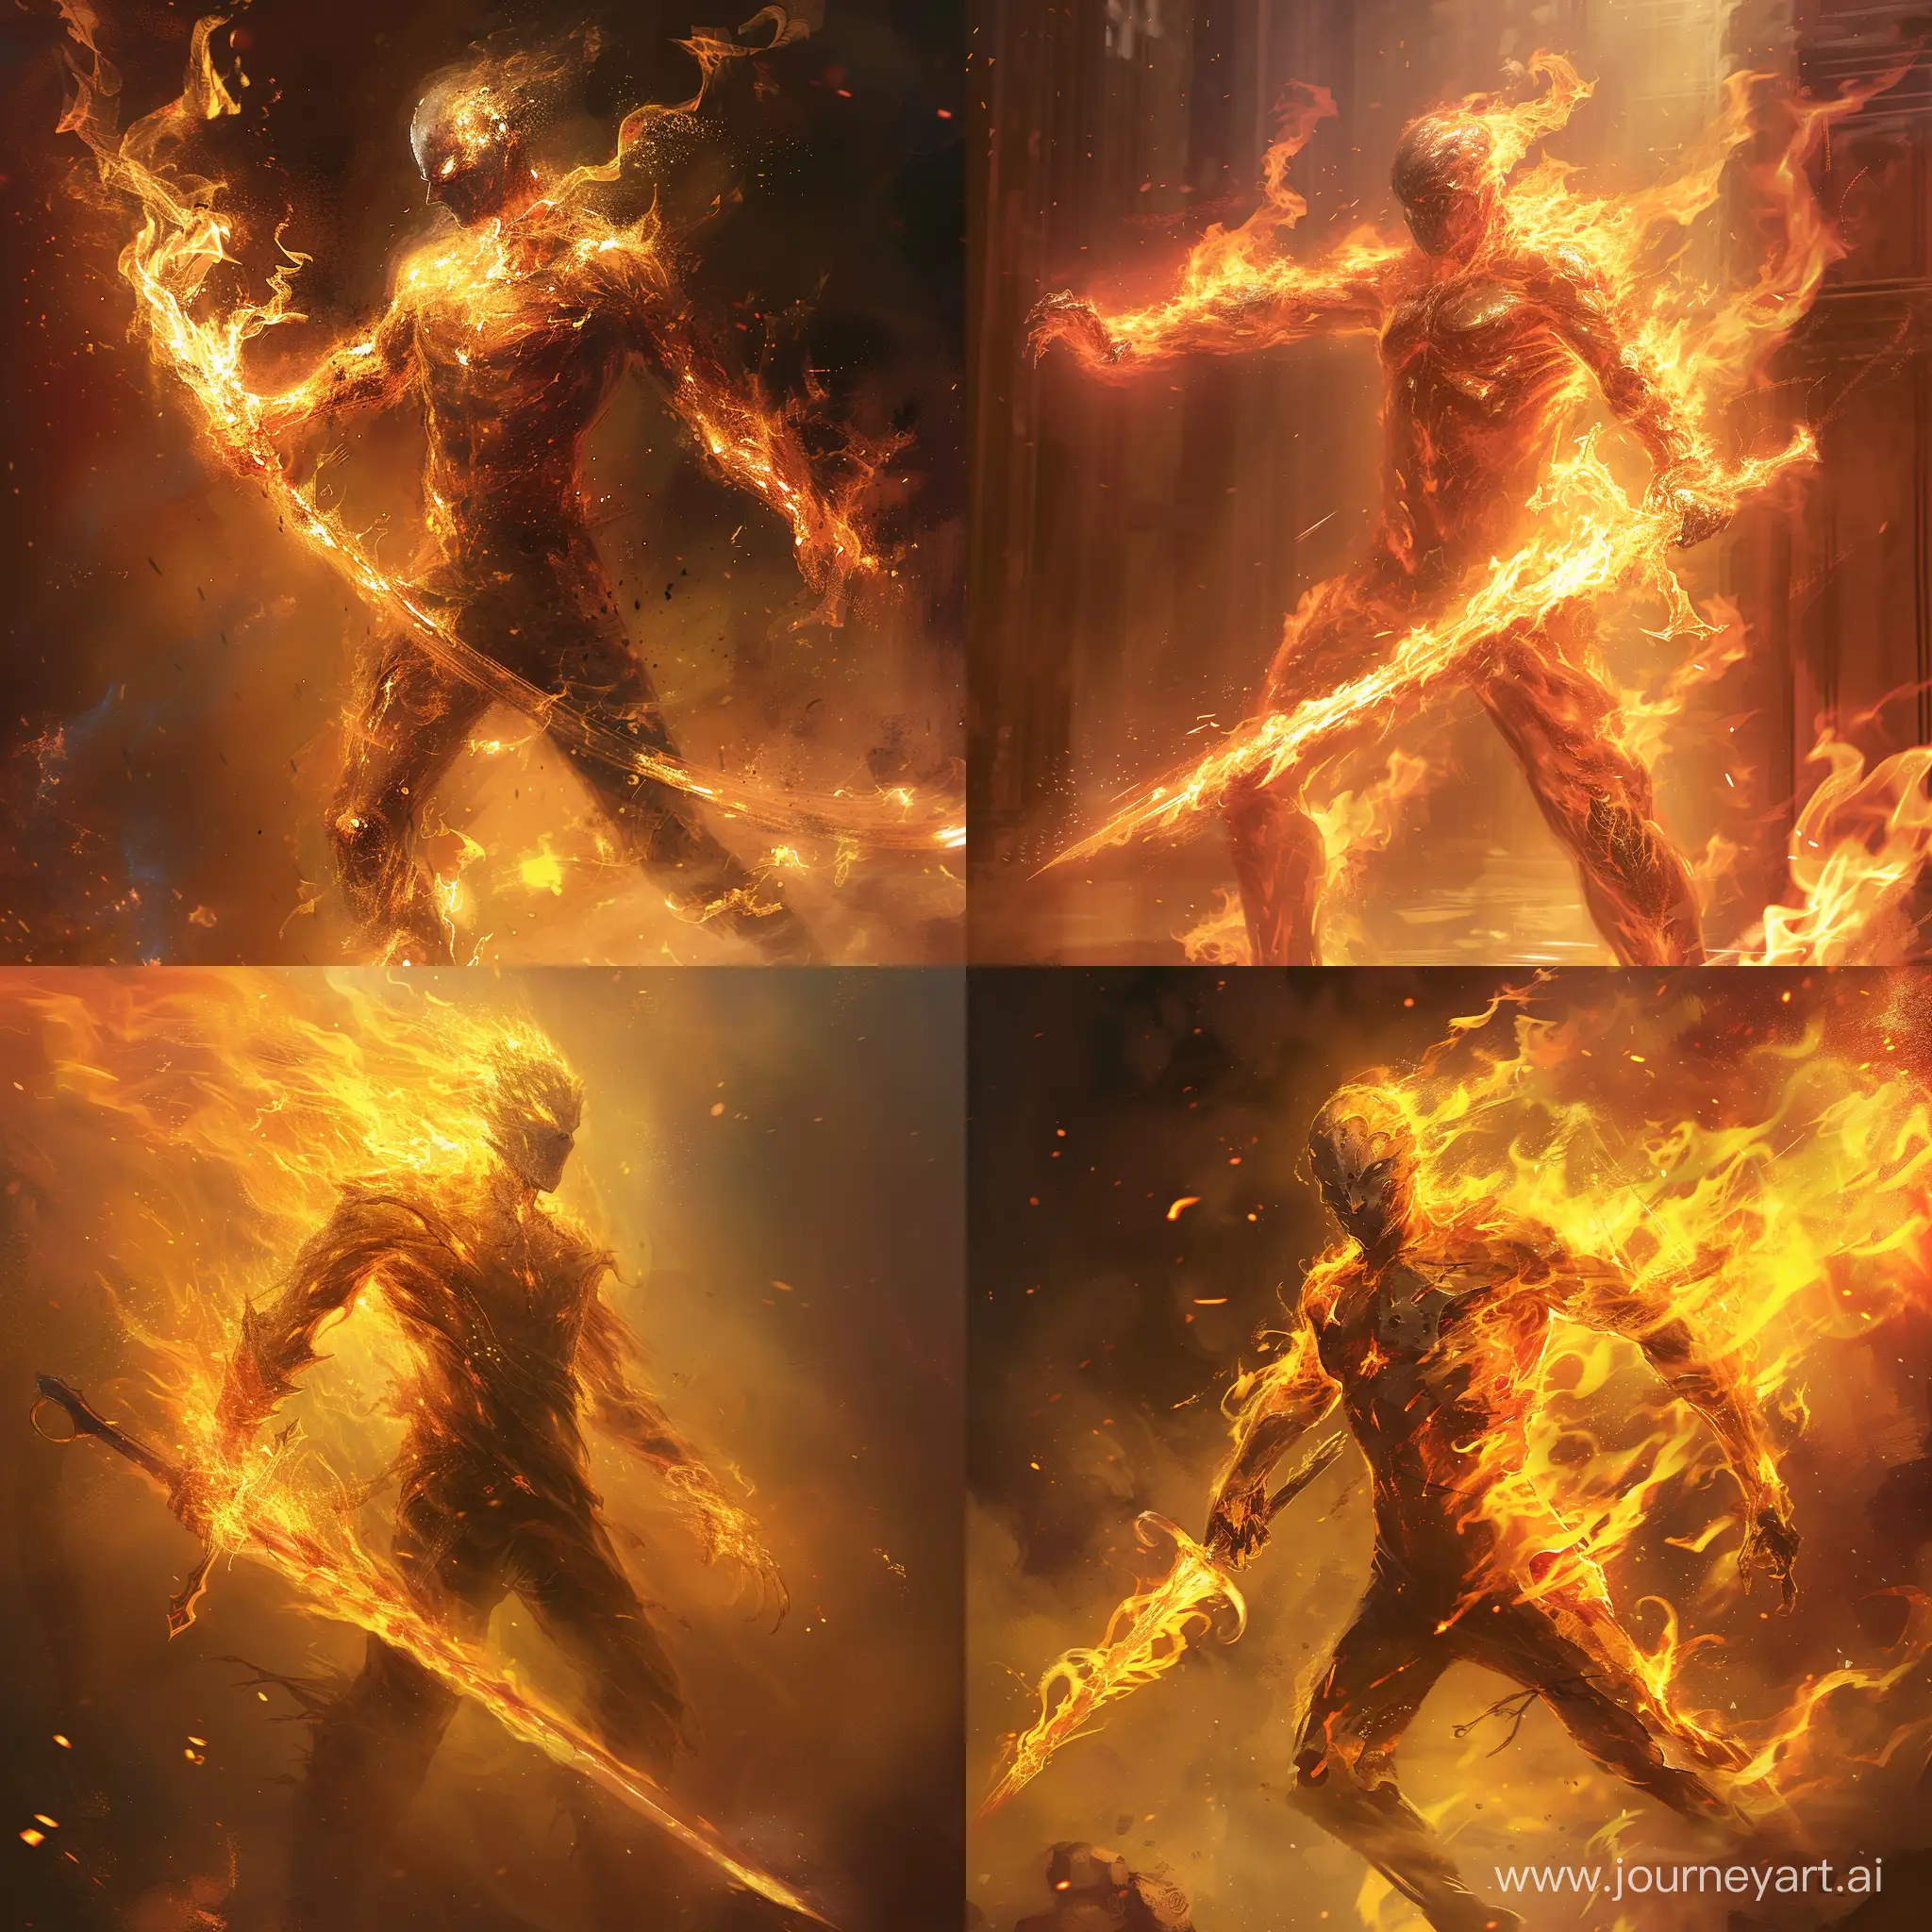 "In the heart of the inferno, a figure emerges, his form flickering with the intensity of a thousand flames. He brandishes a rapier forged from the very essence of fire itself, ready to challenge any who dare to cross his path."